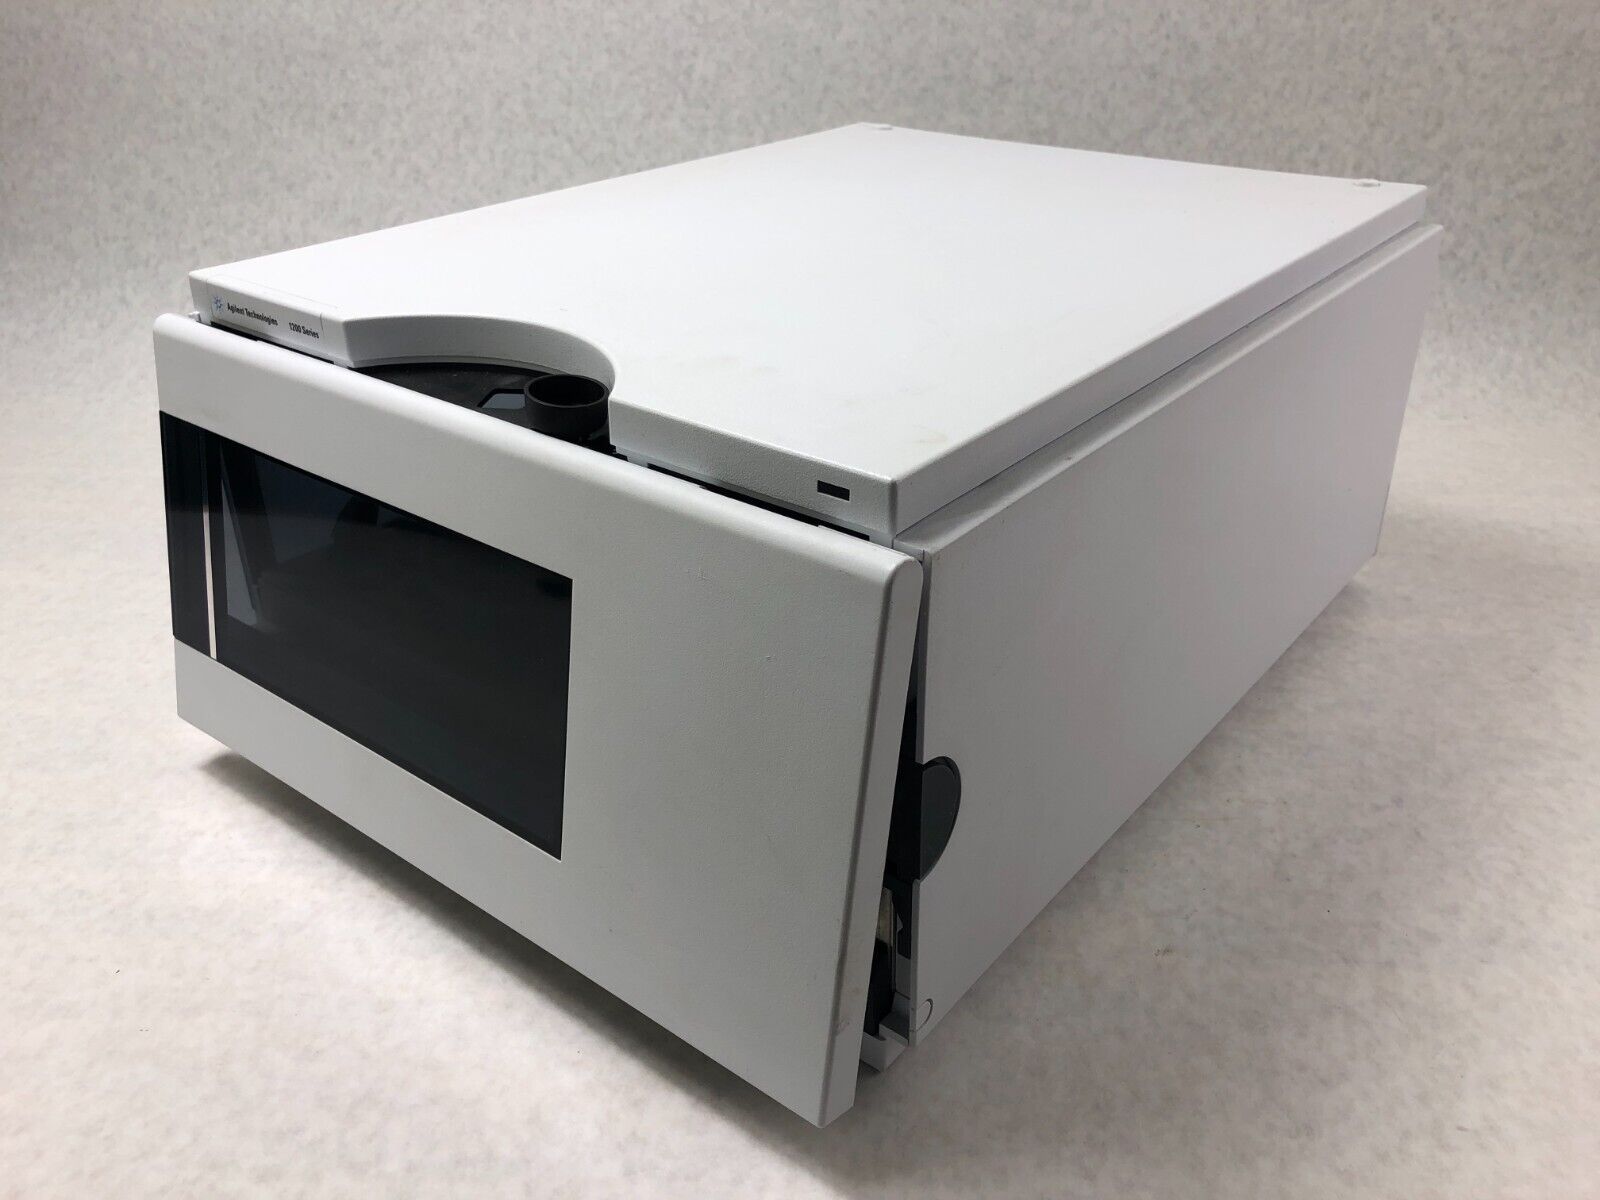 Agilent HP G1364B Preparative Scale Fraction Collector 1200 Series HPLC 63055632